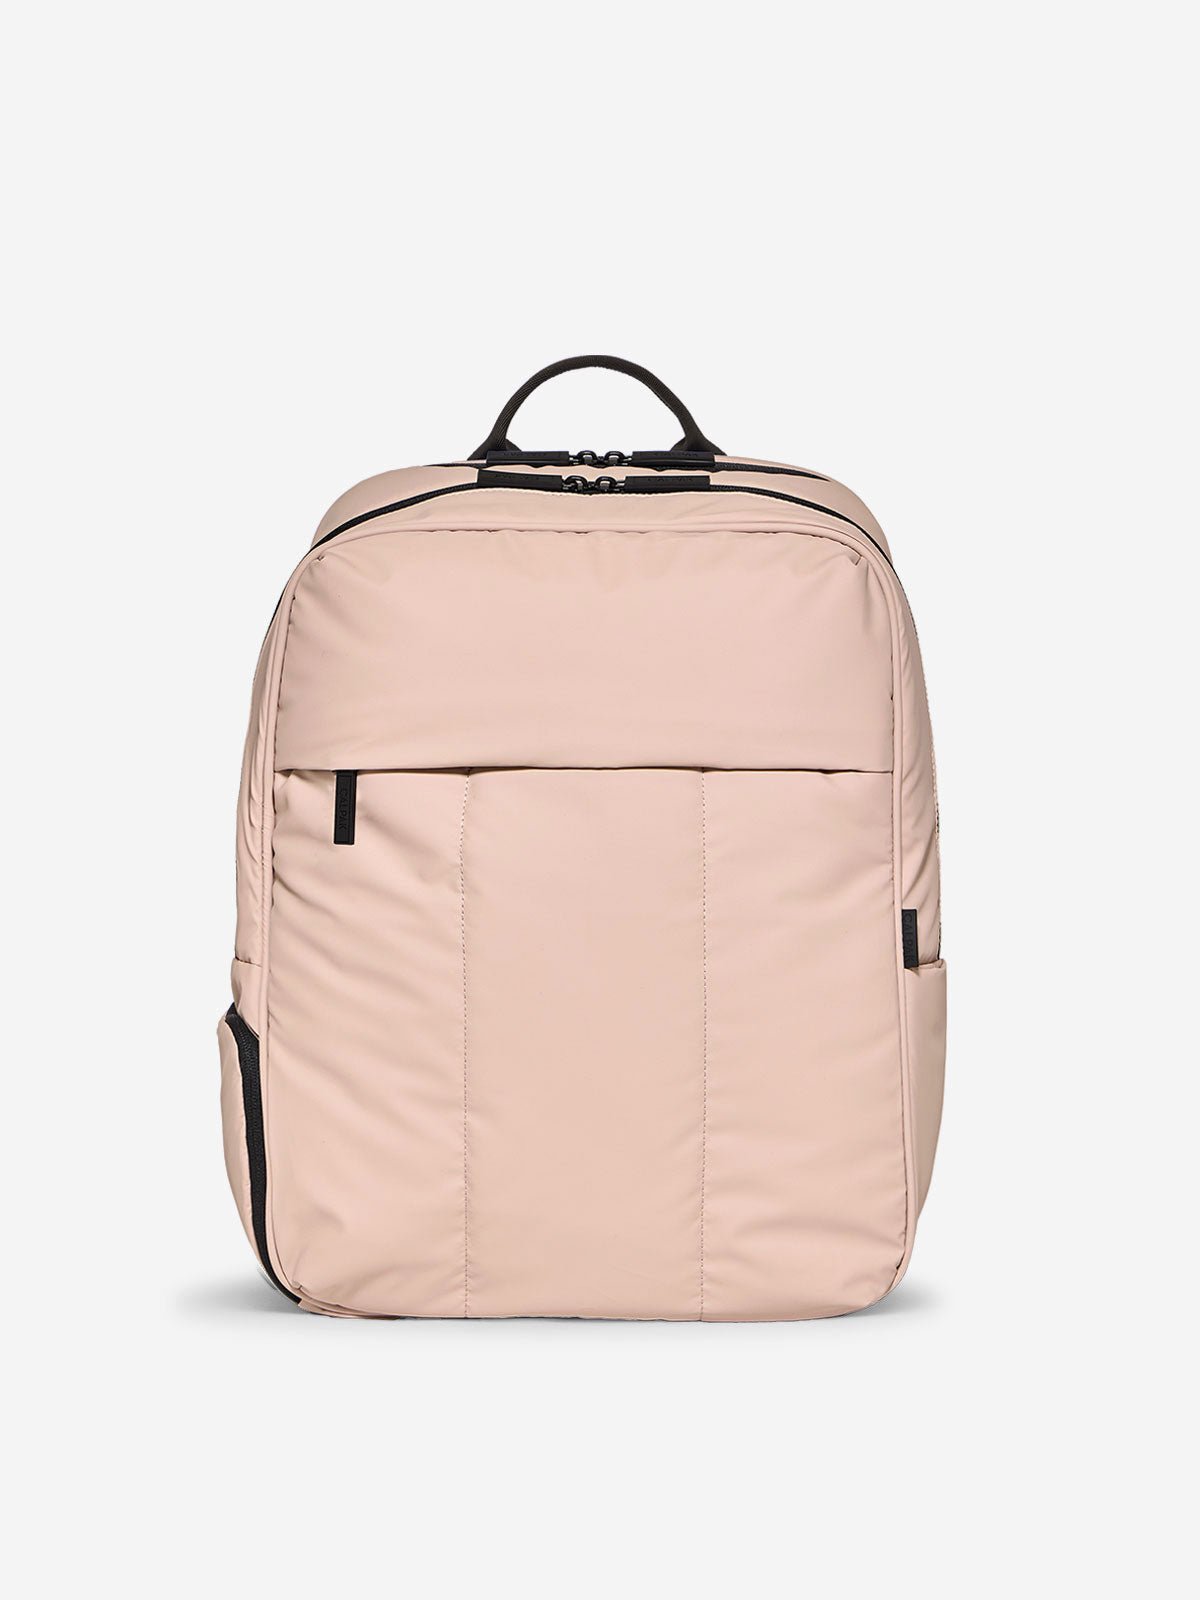 CALPAK Luka 17 inch Laptop Backpack featuring soft, puffy exterior and water resistant lining in rose quartz